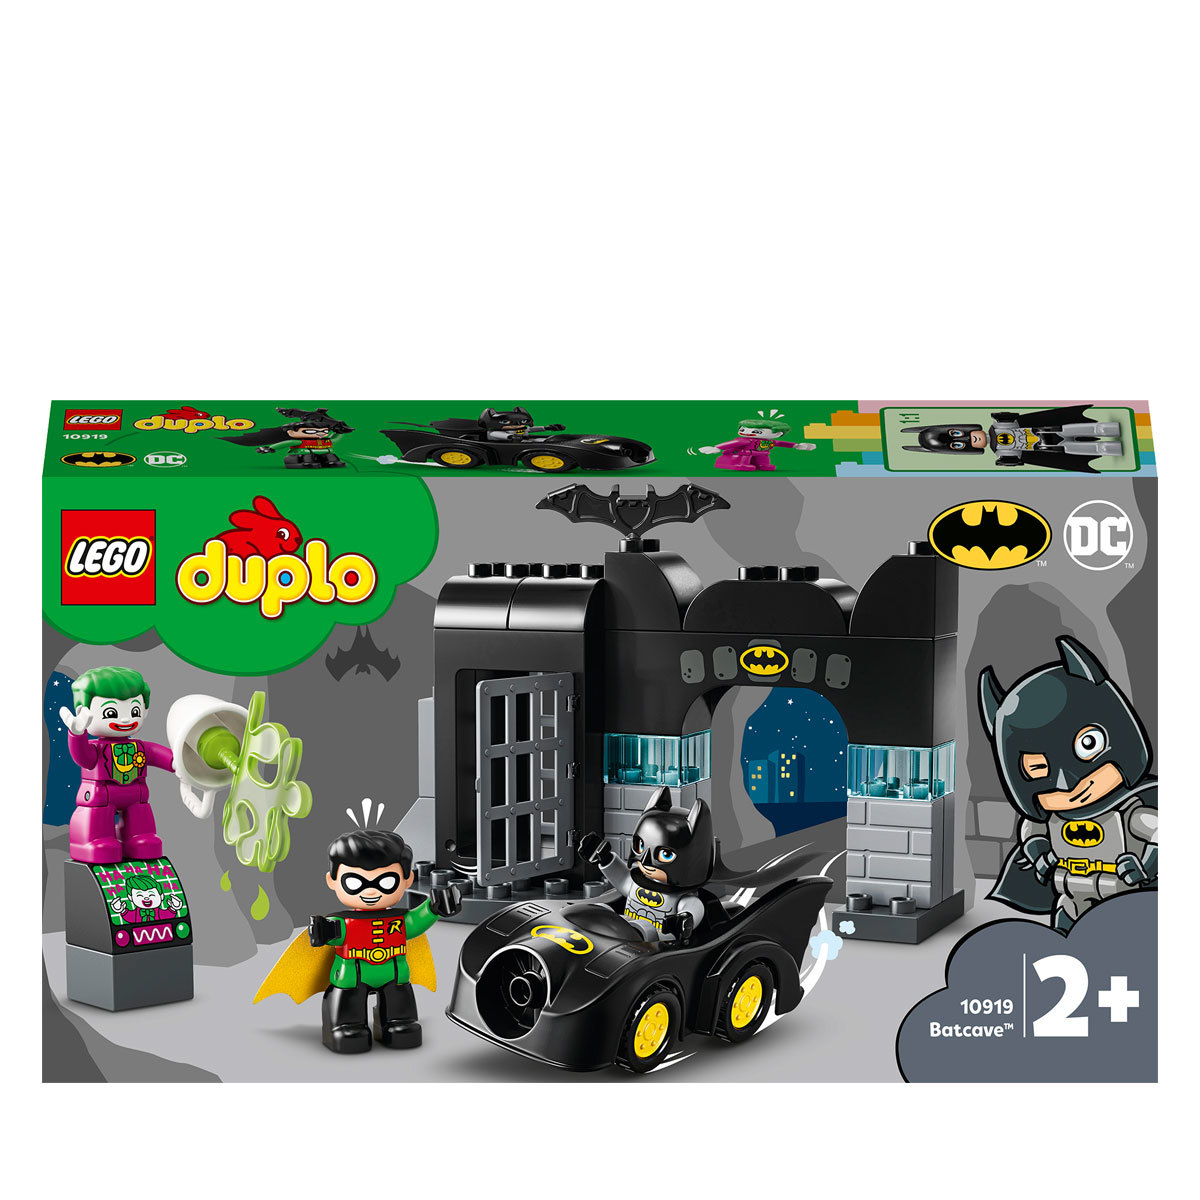 LEGO Duplo DC Super Heroes Batman Batcave - 10919 | Early Learning Centre